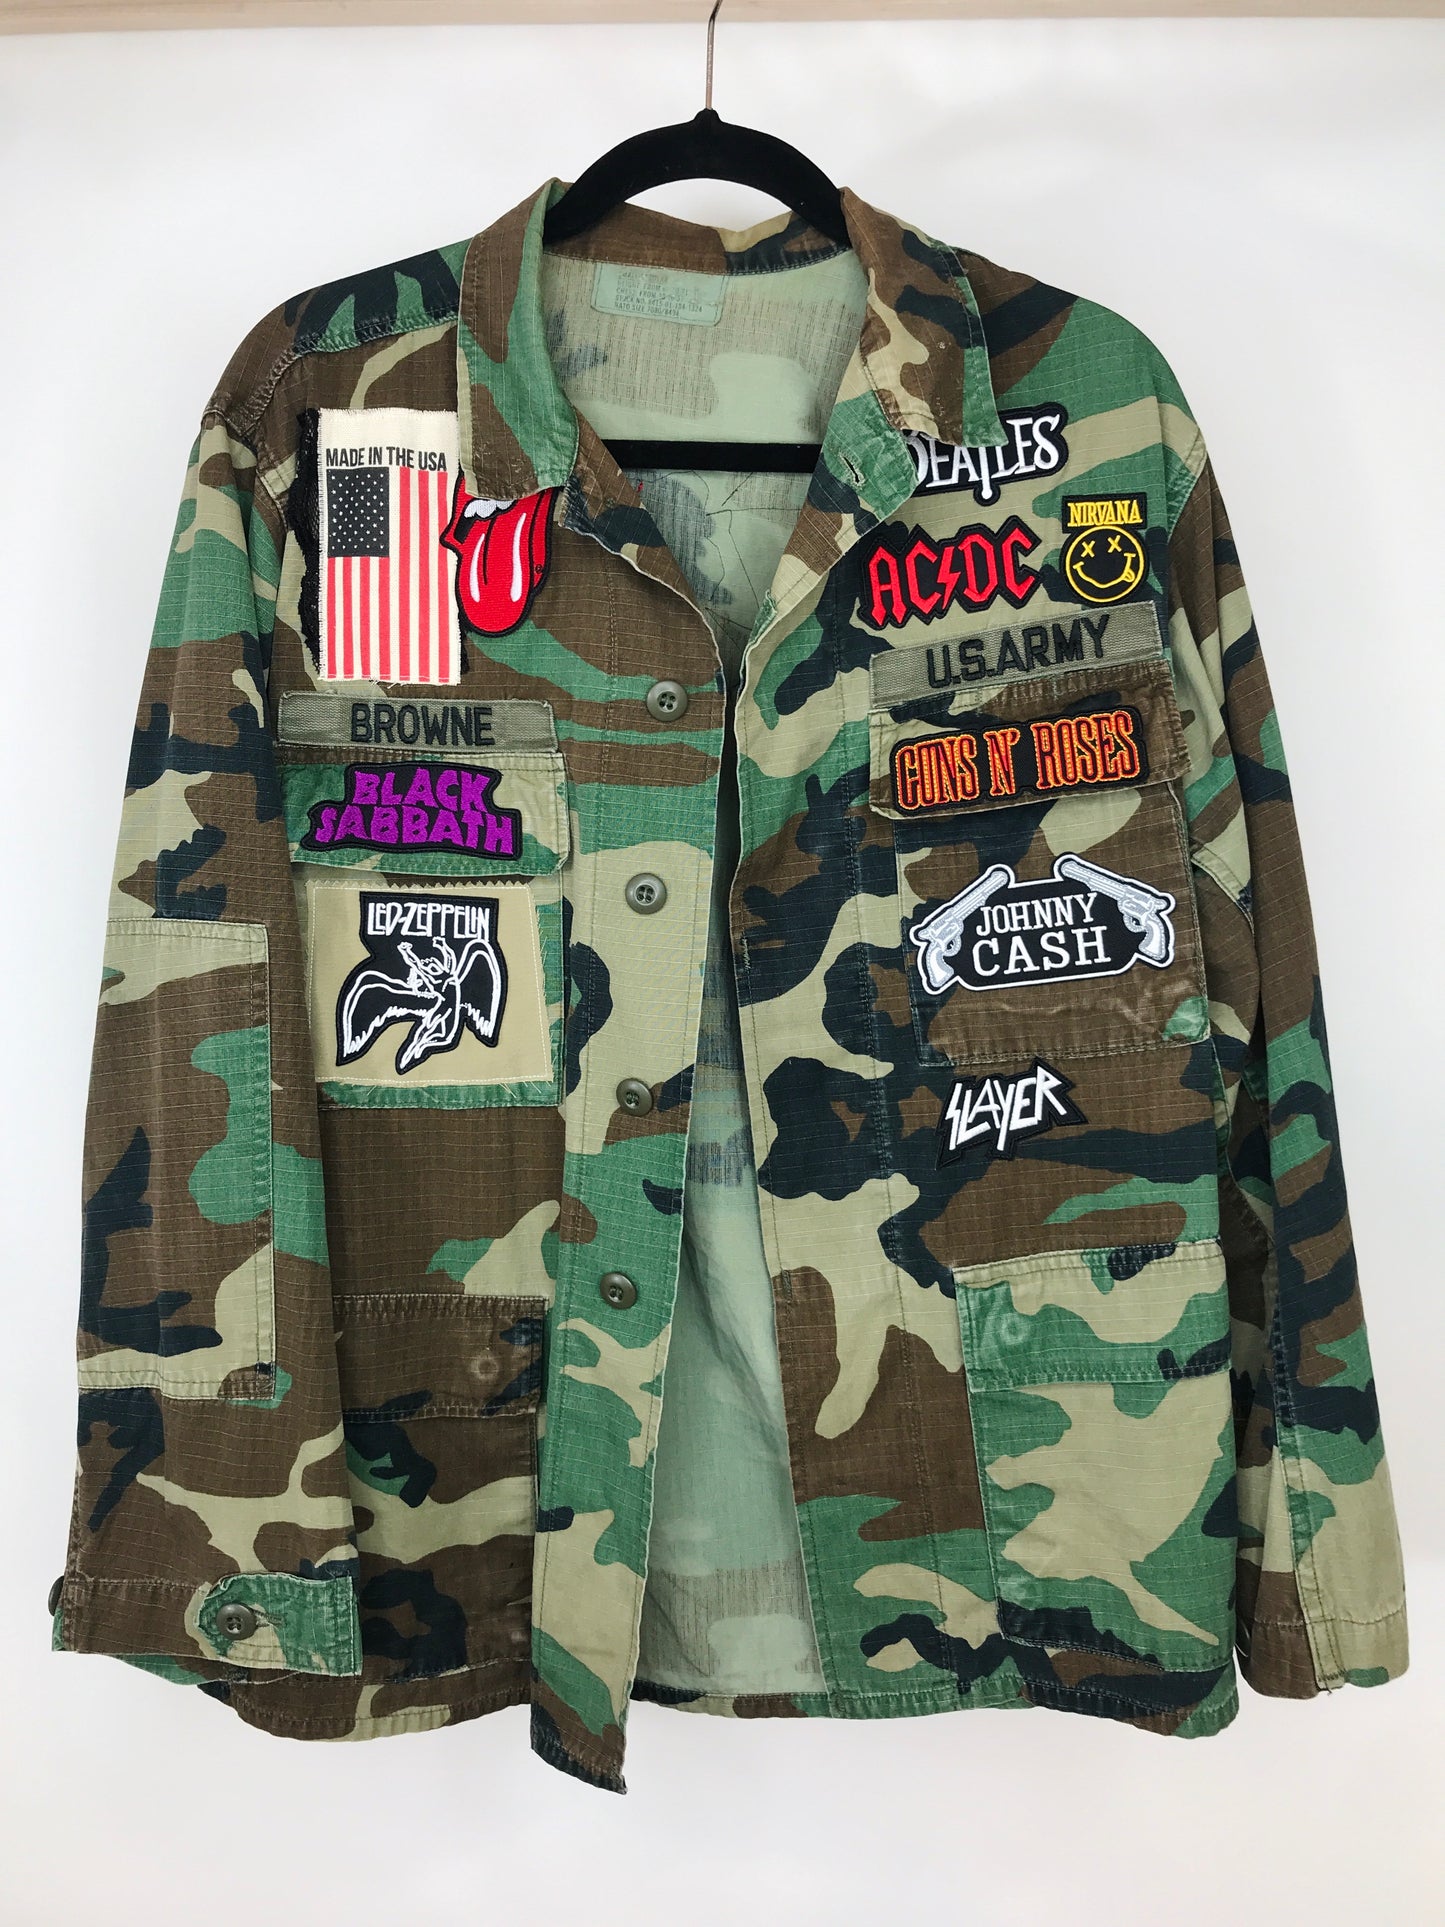 JT Vintage Collection - Bandlove Army Jackets